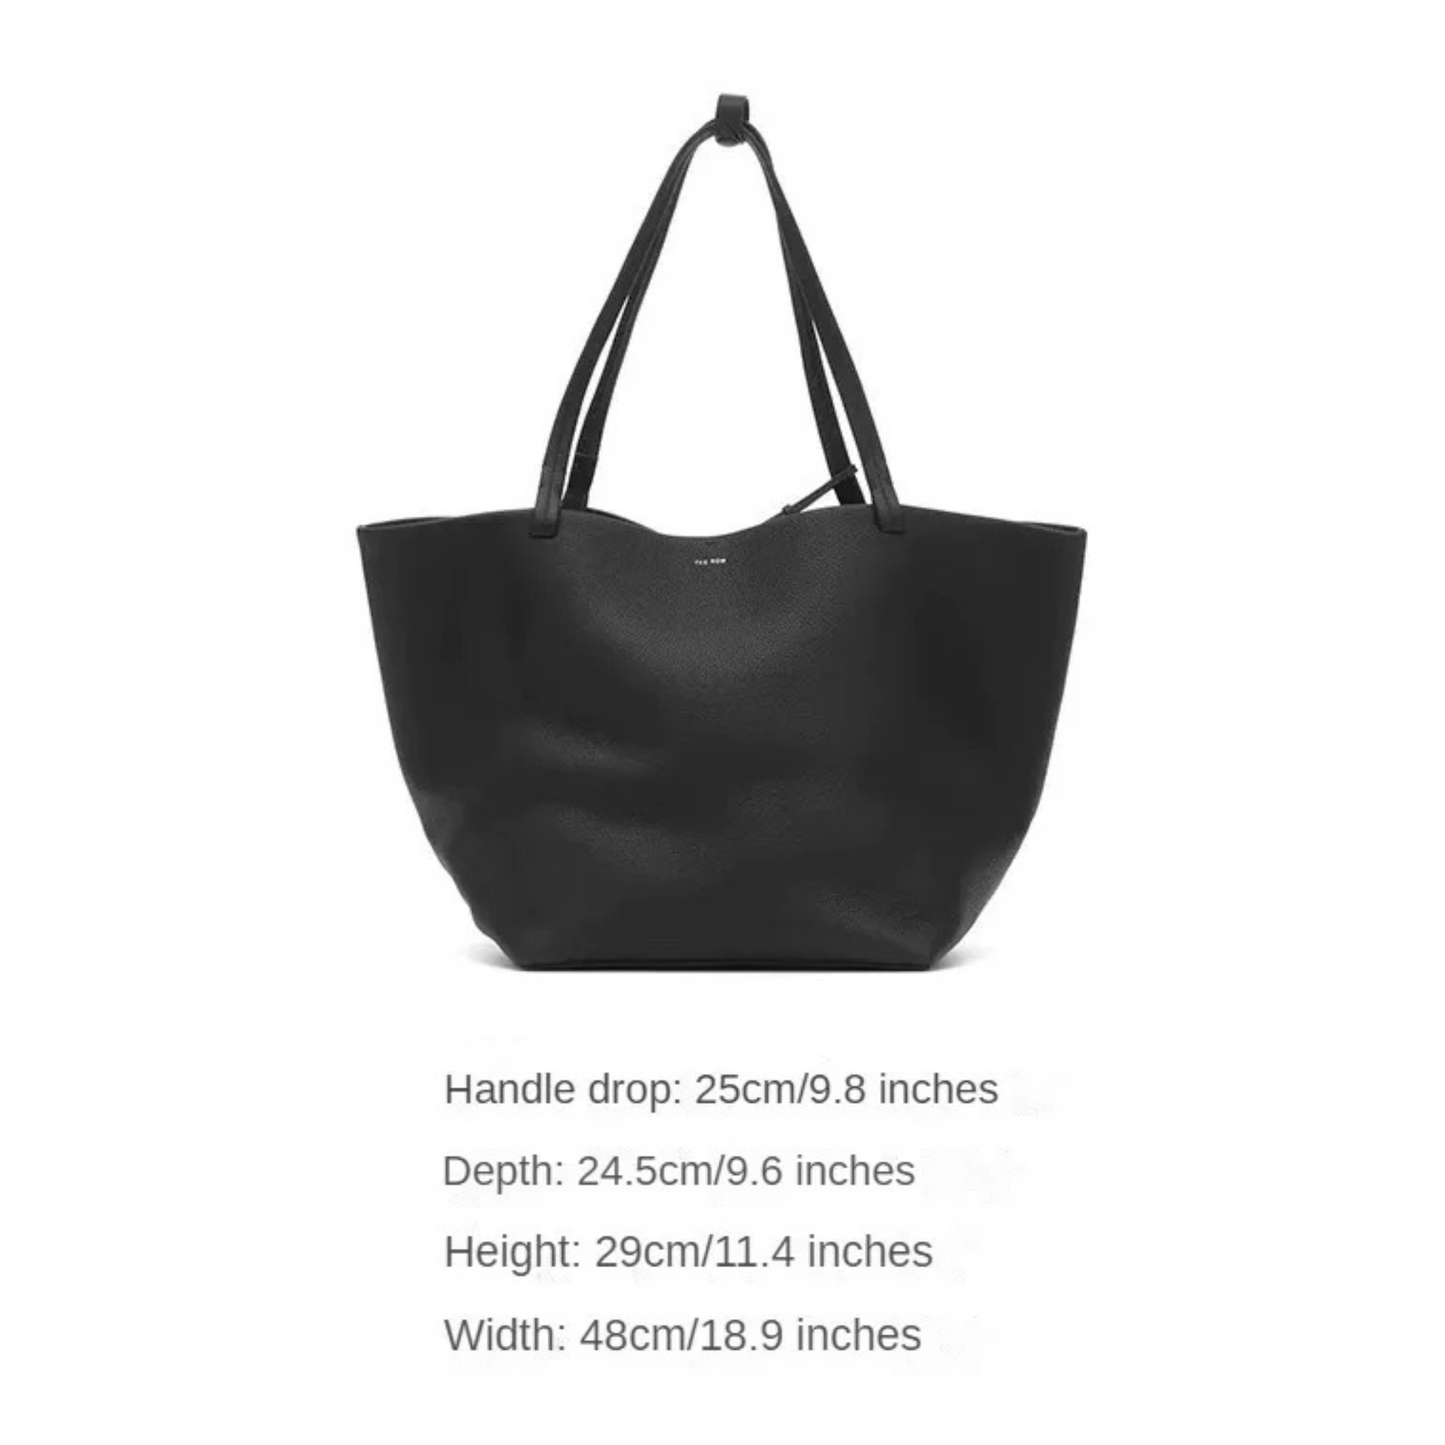 The "Row-Park-inspired" Leather Tote Bag